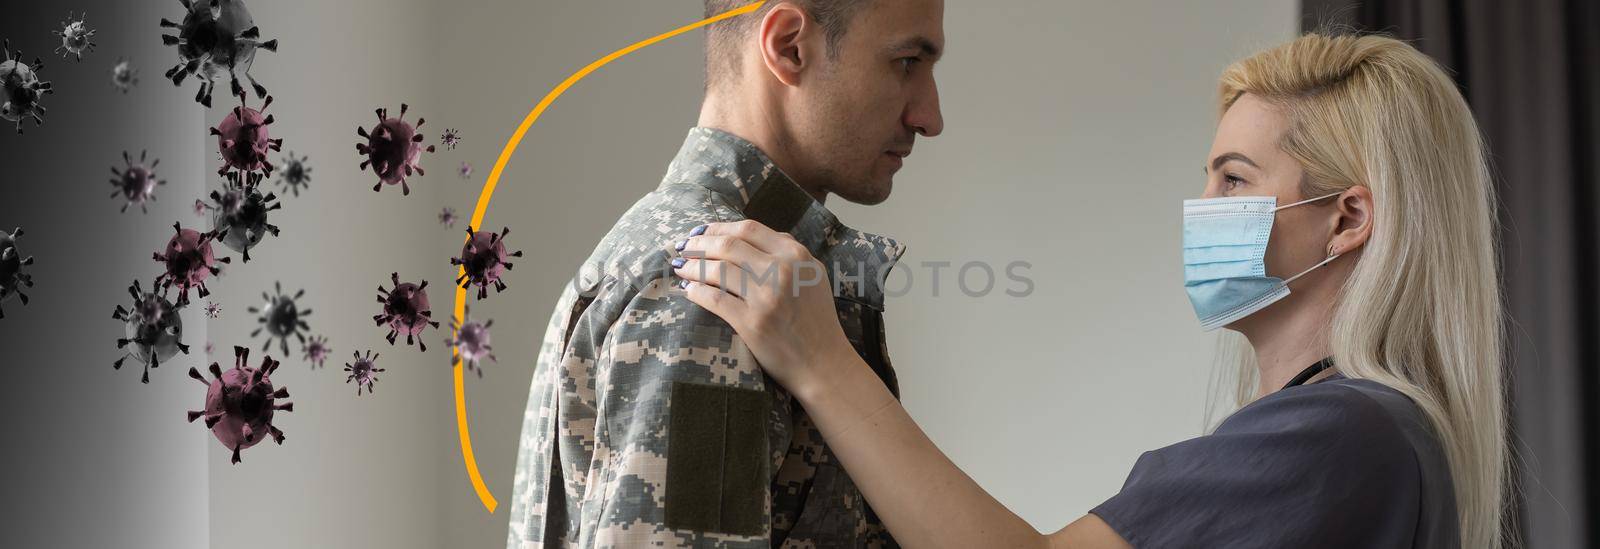 Cheerful young man in camouflage uniform soldierprotected from the virus by a dome, military man, copy space.